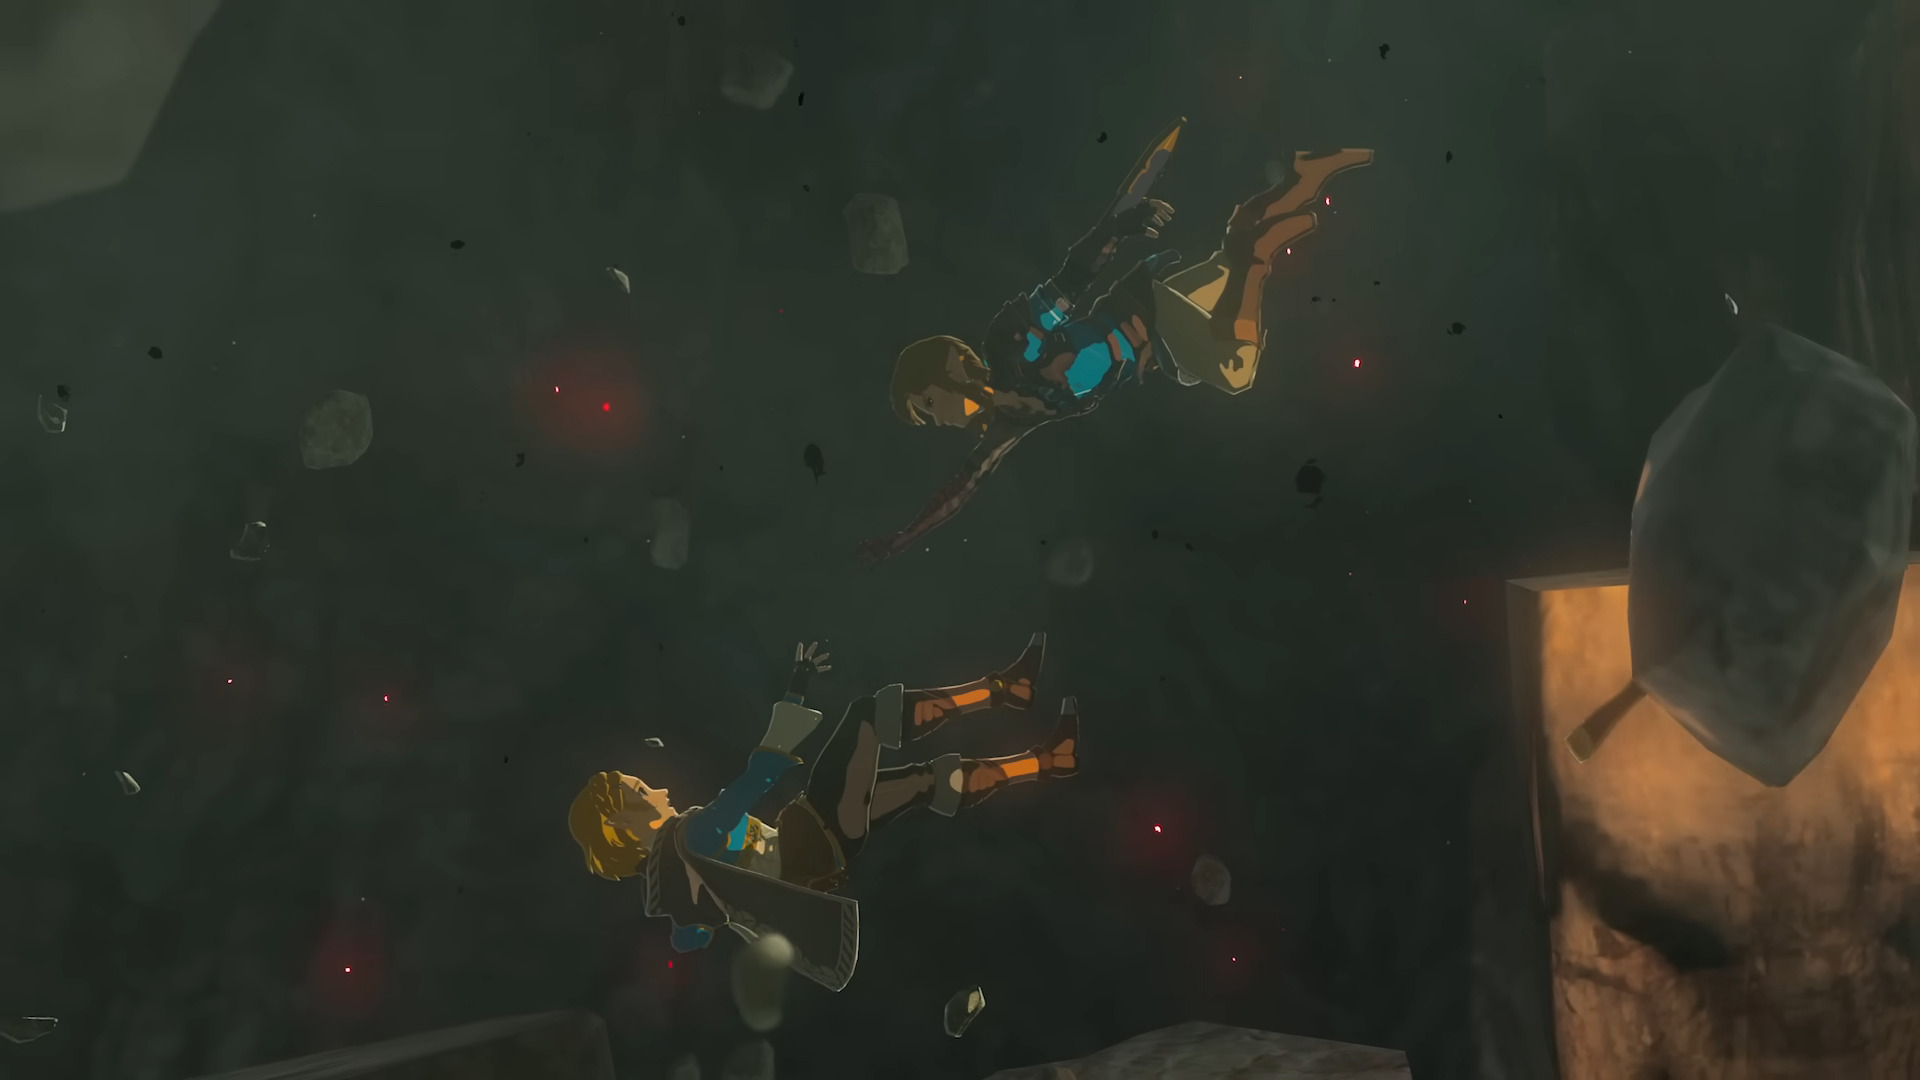 Link diving after Zelda, who is reaching out for him